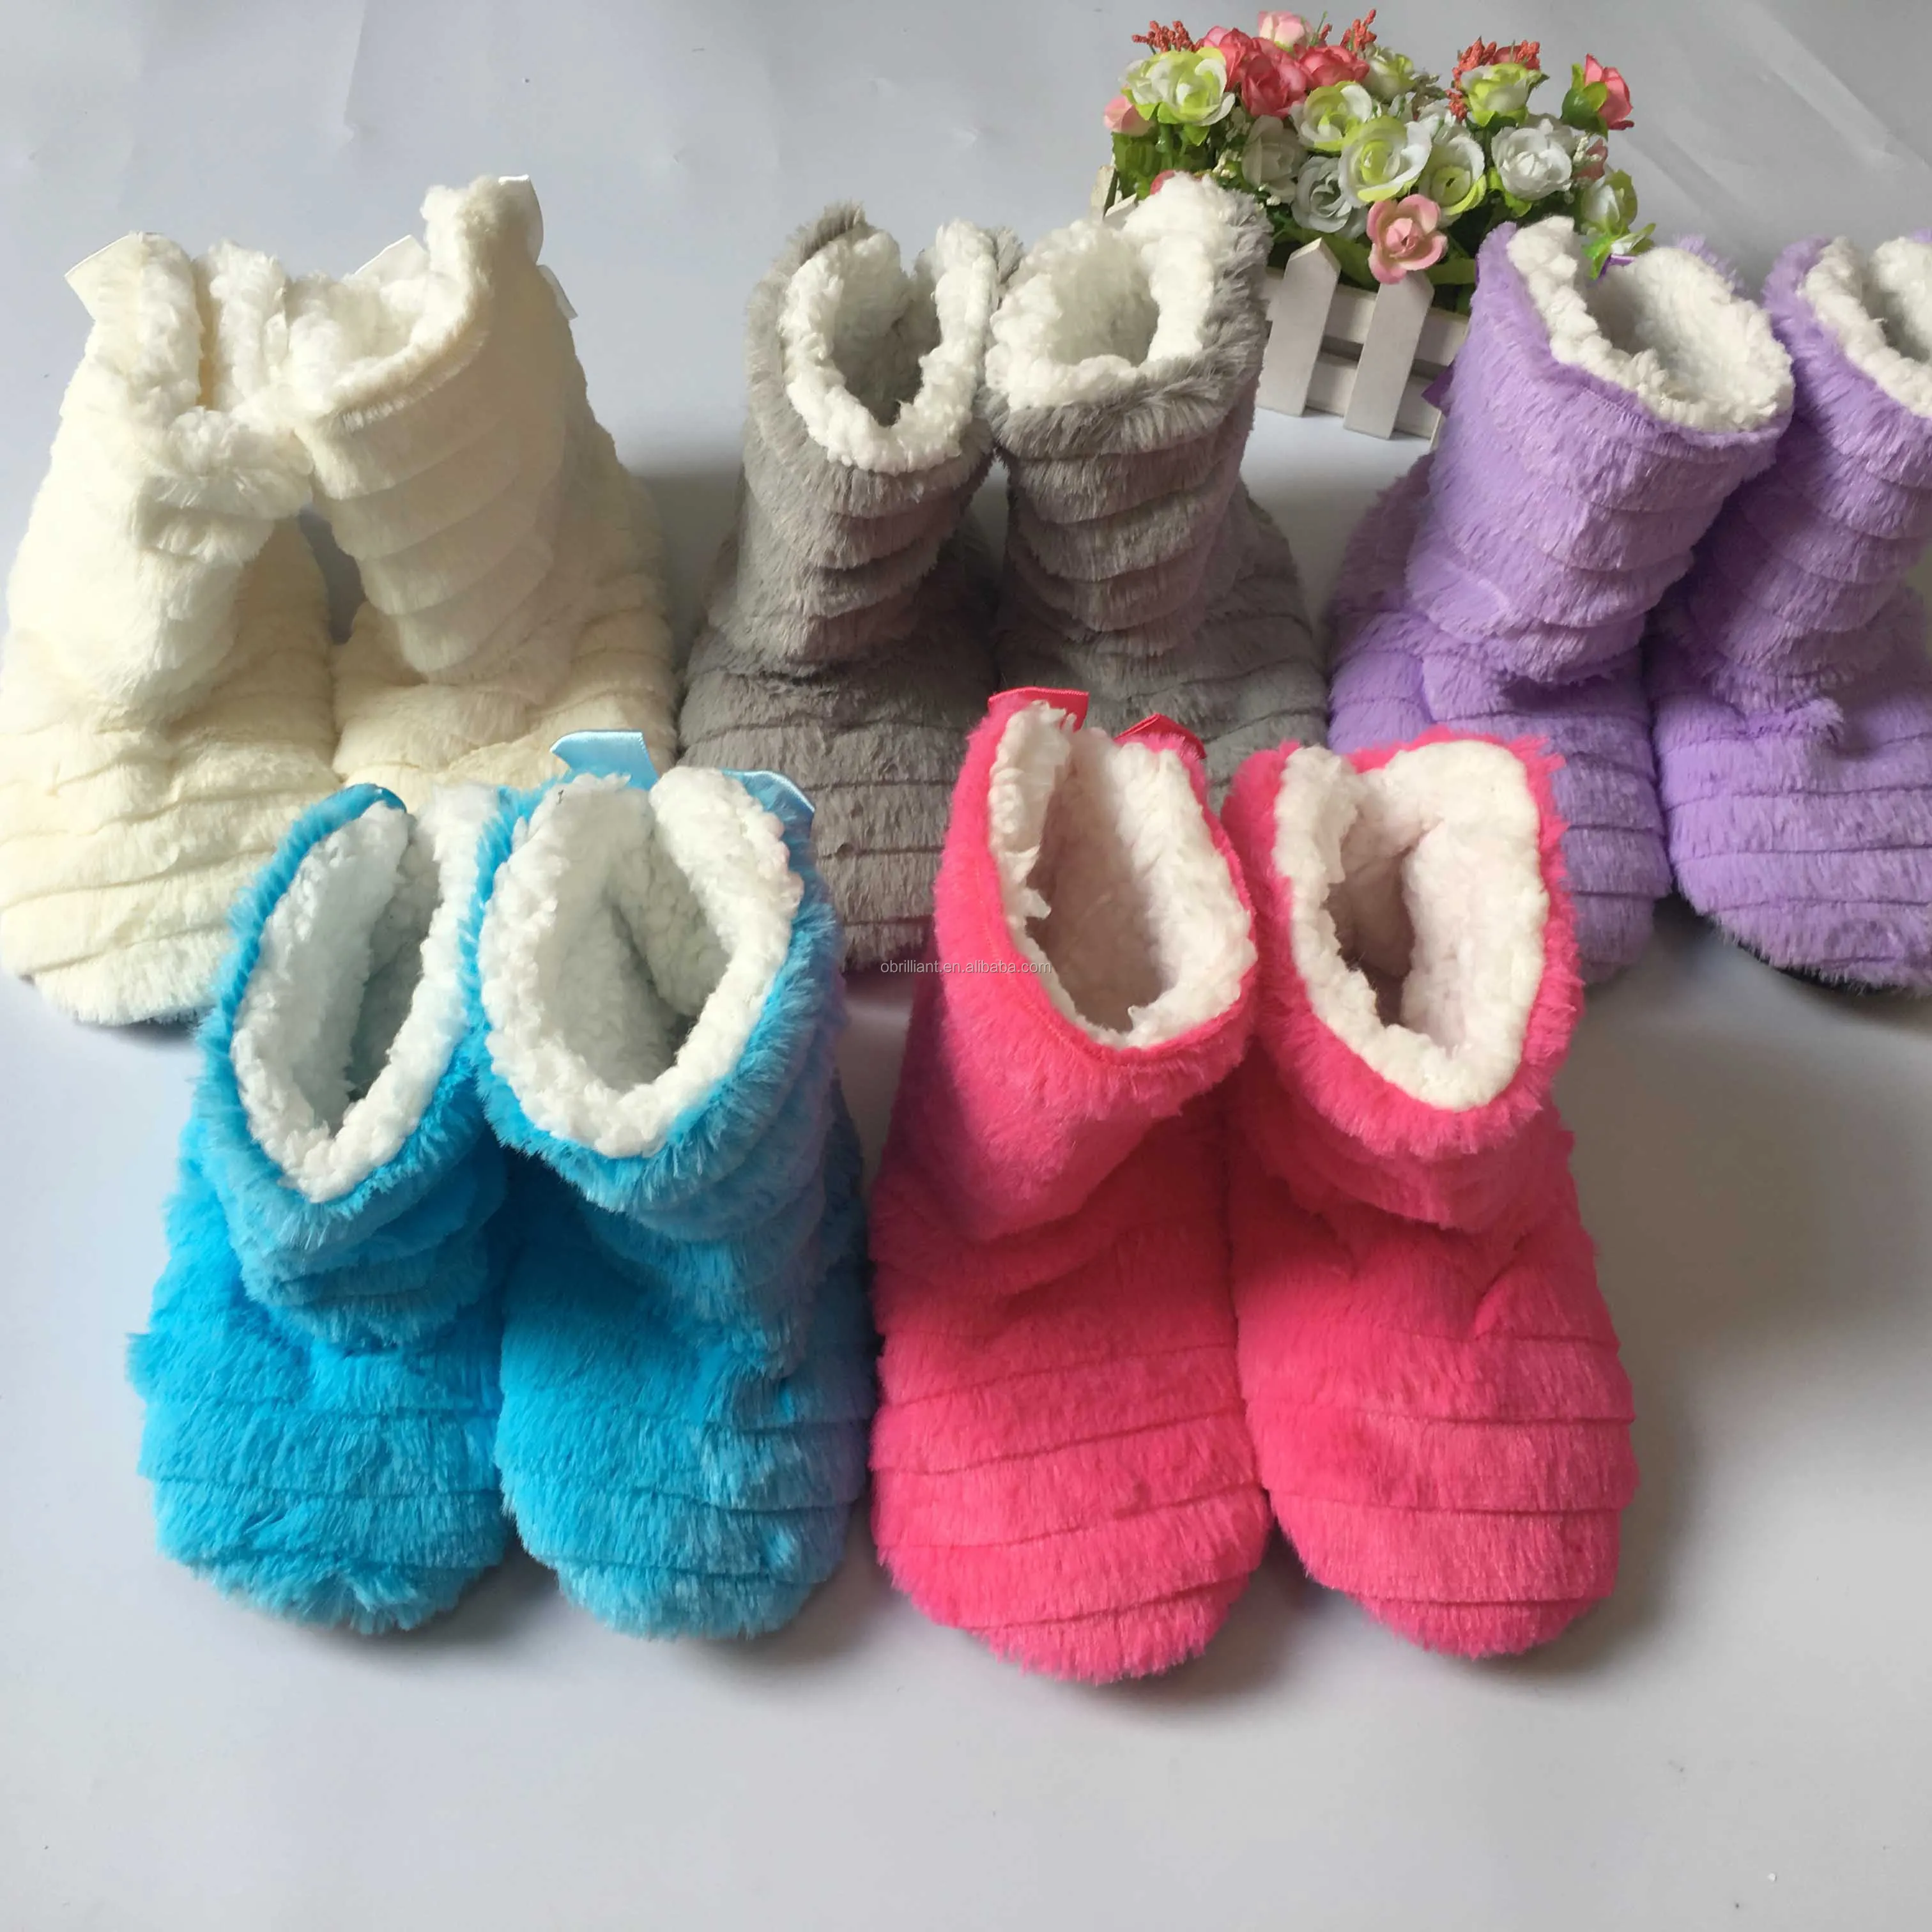 Childrens/Kids/Toddlers Coral Fleece Toddlers Bootie Boot Slippers 